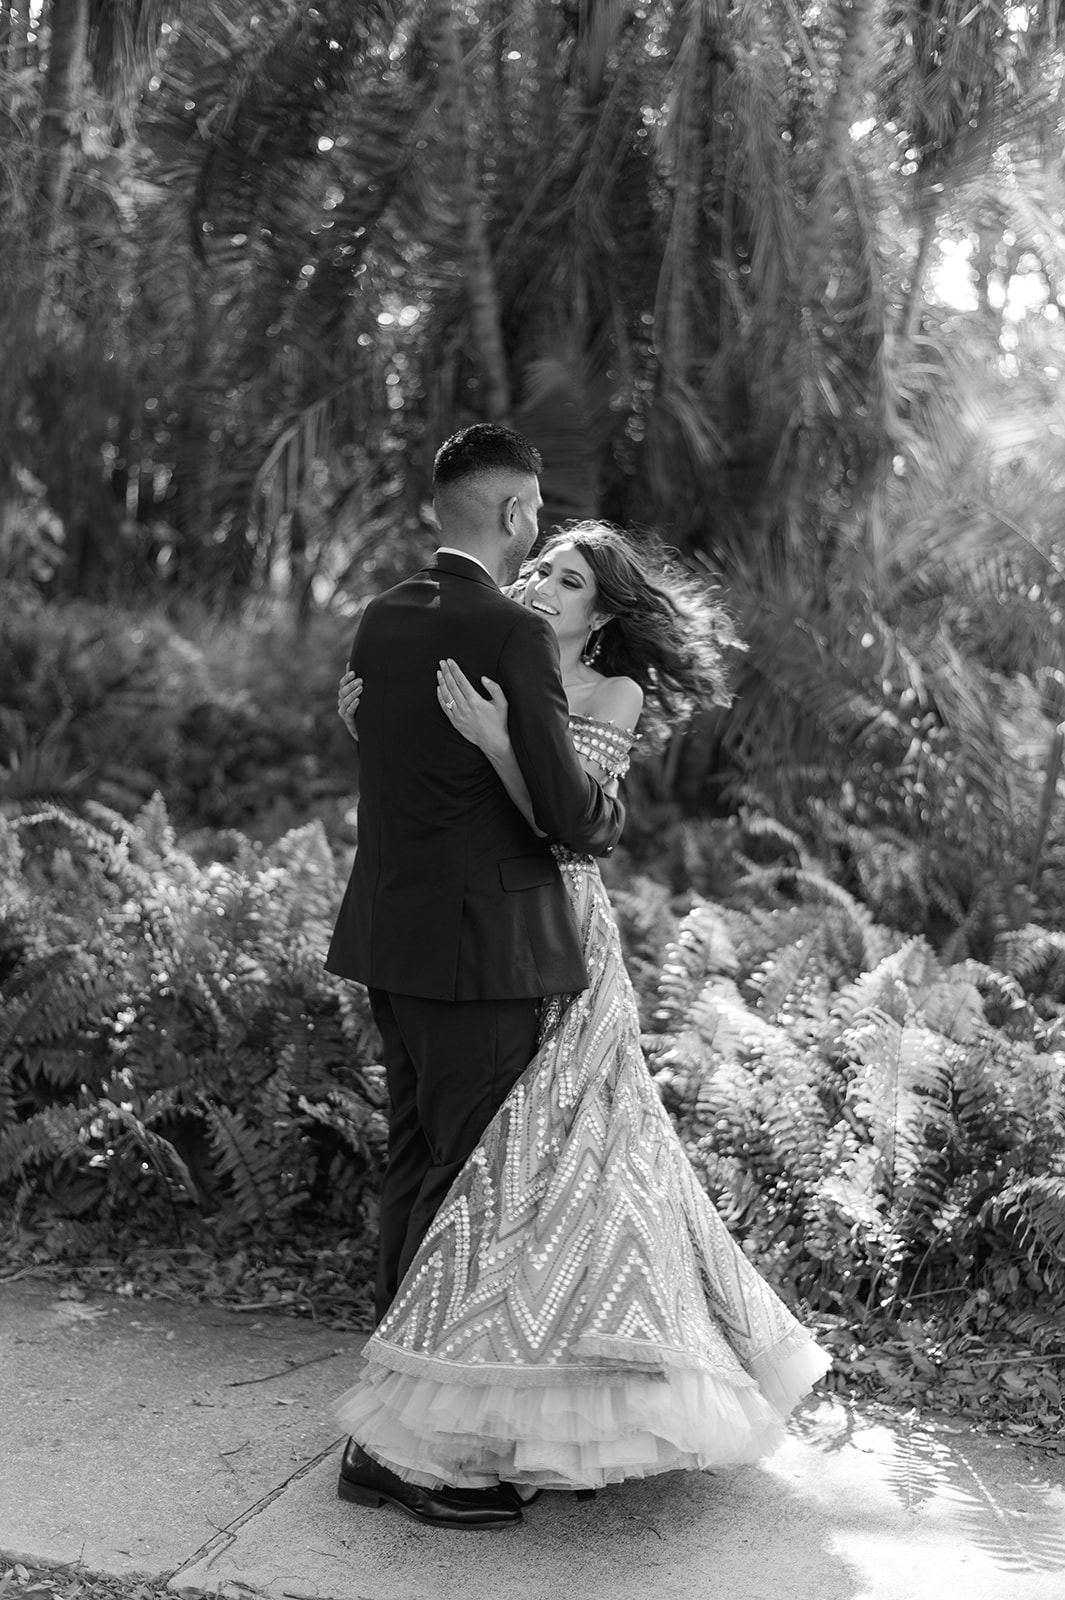 "Ringling Museum engagement shoot captures the elegance of the Ca' d'Zan mansion and Indian couple's love"
